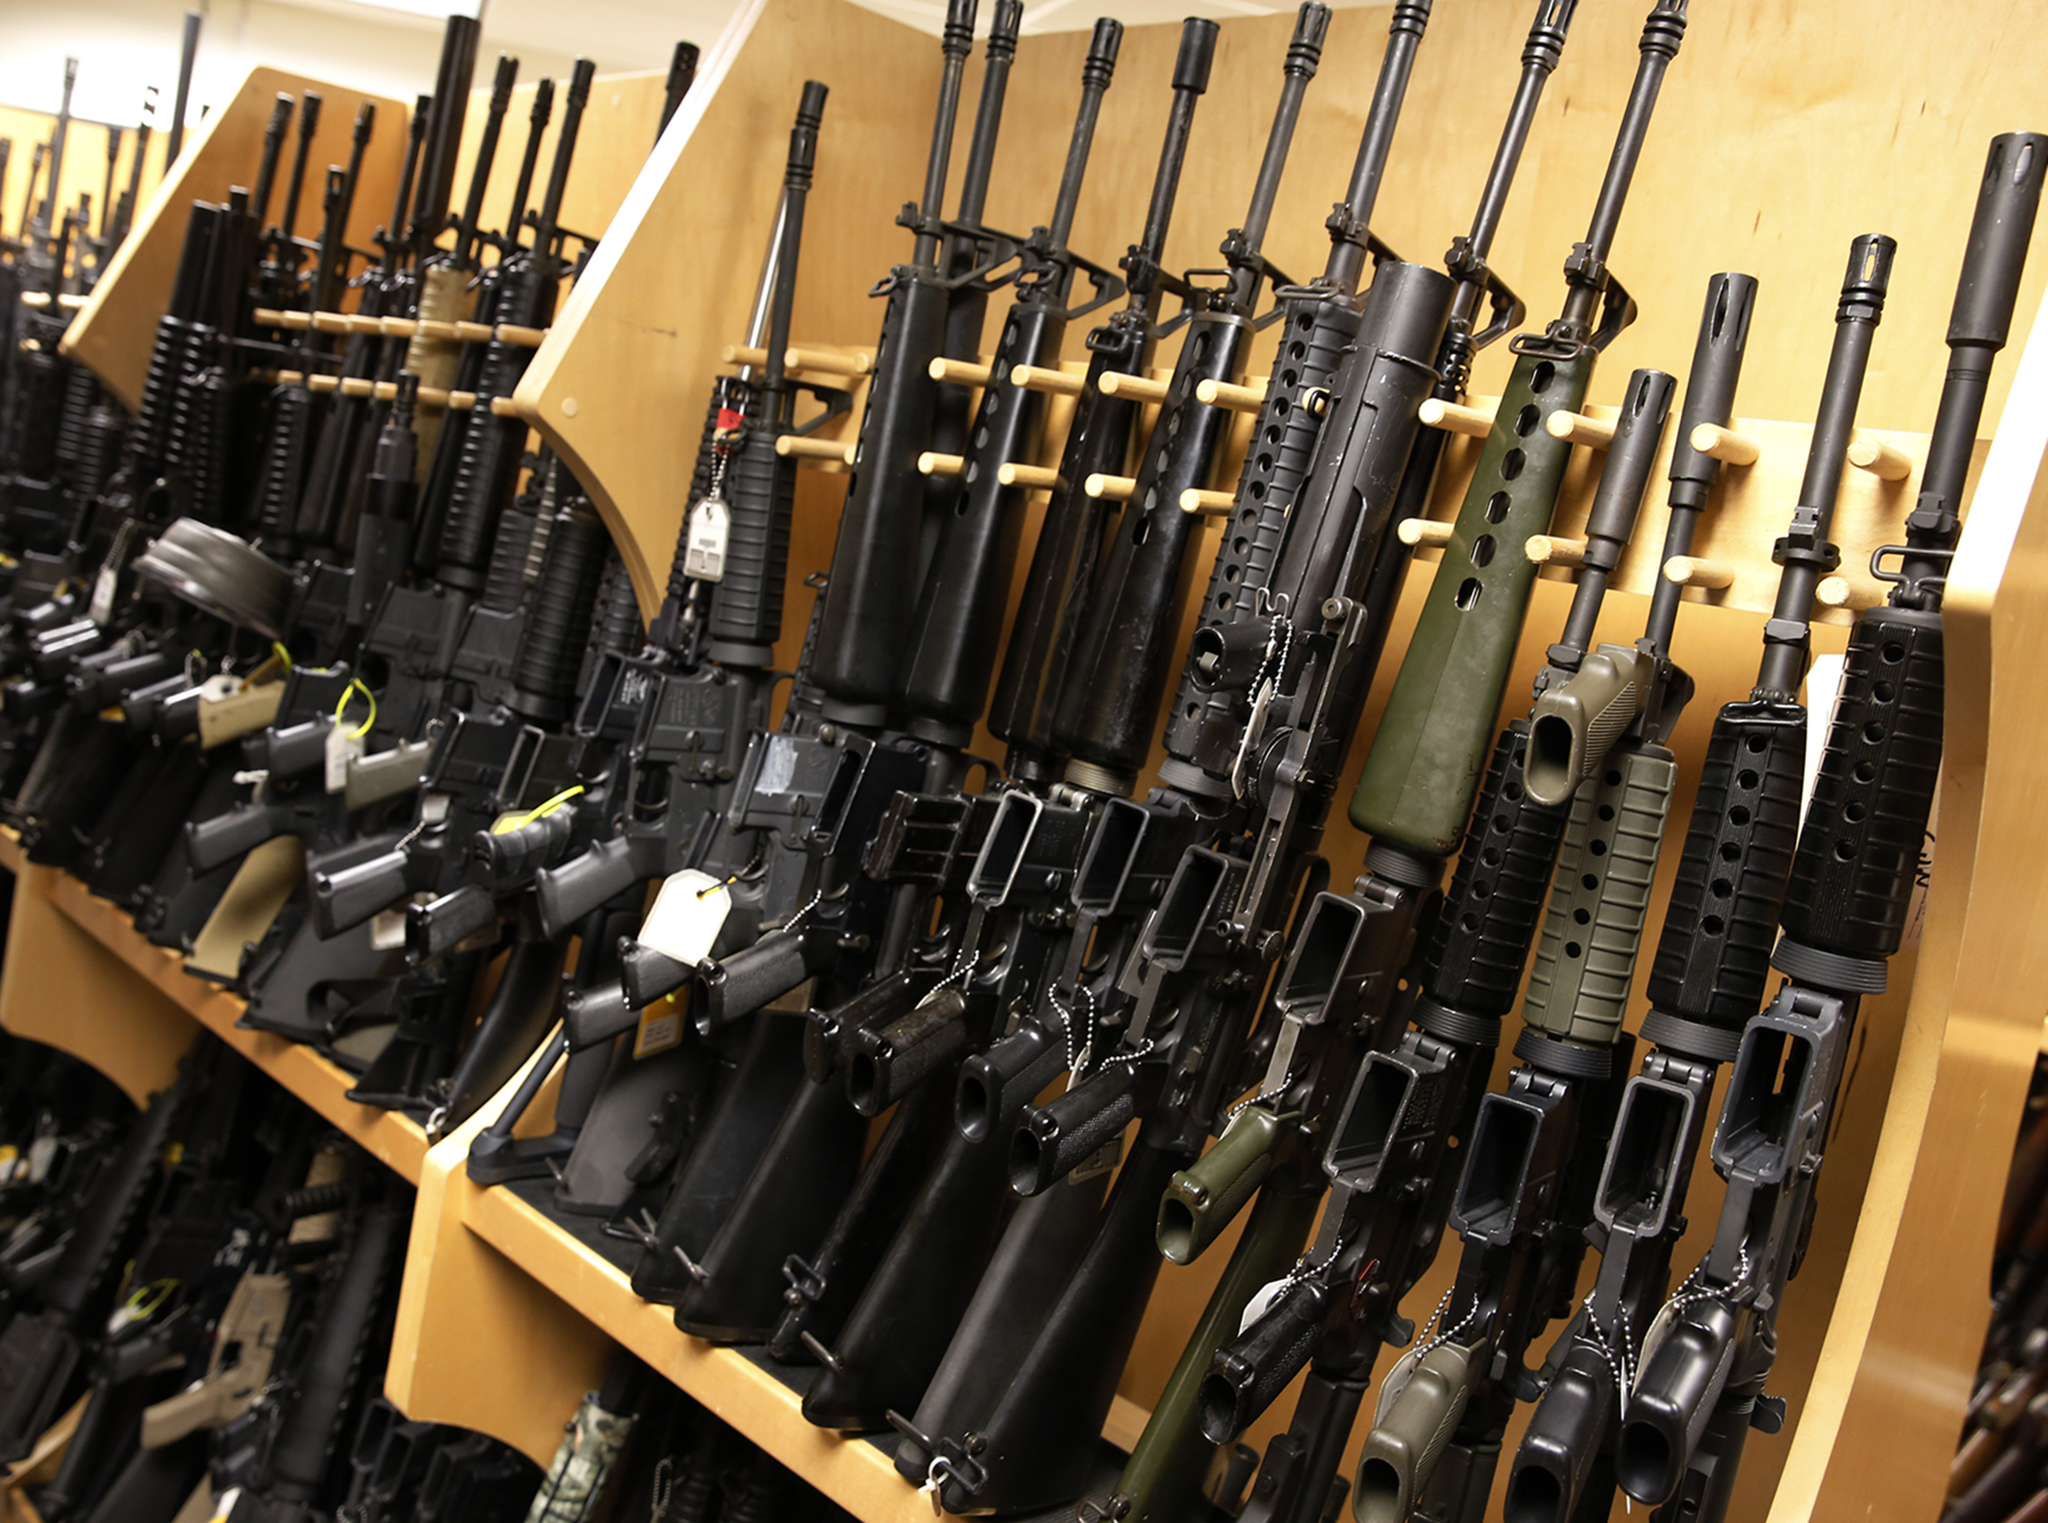 AR-15 rifles line a shelf in the gun library at the ATF National Tracing Center in Martinsburg, West Virginia